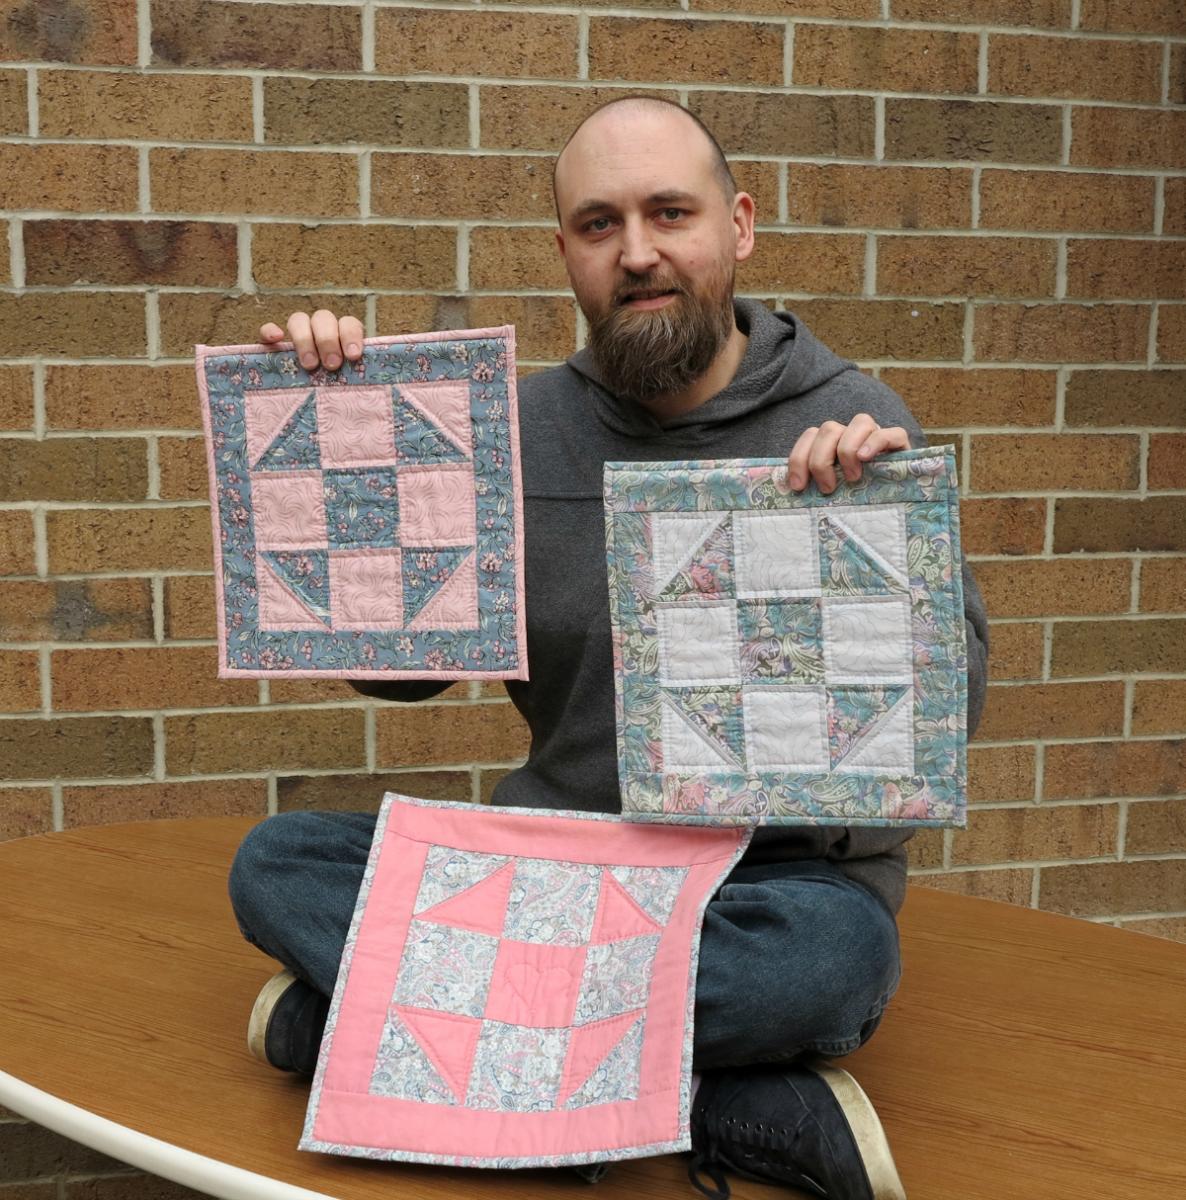 Cat's Meow staffer, Chris, holding his mother's Shoo Fly Quilt blocks created in her quilting class.